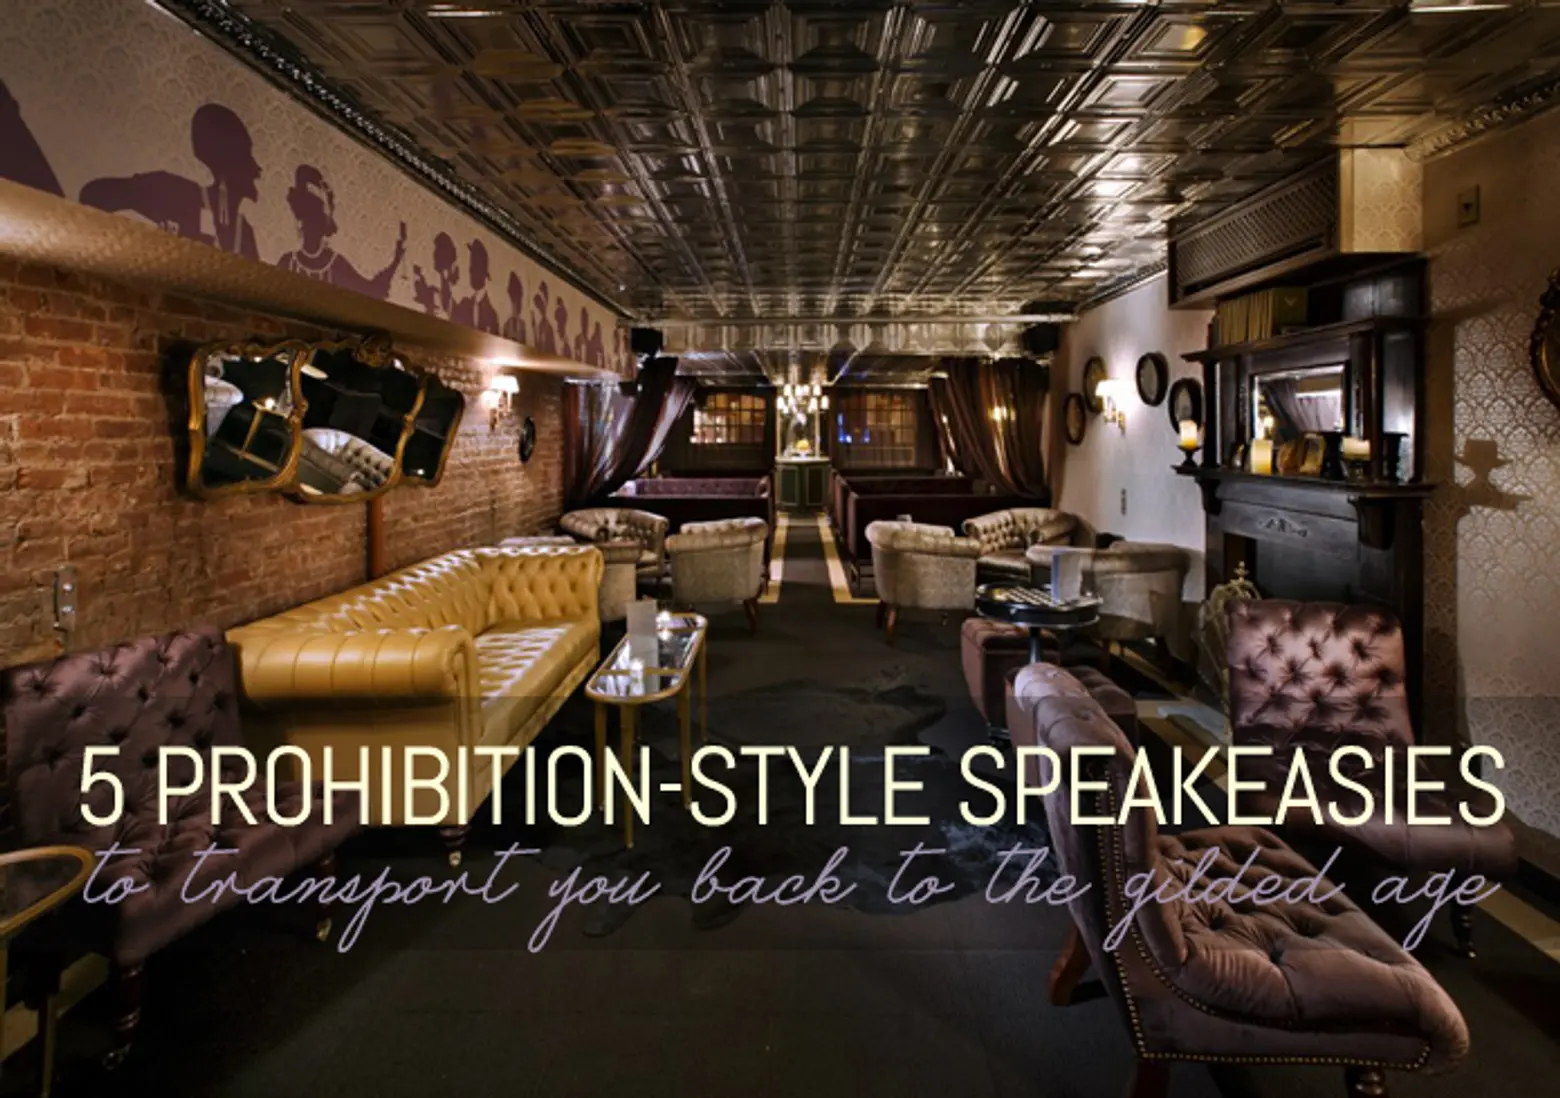 The Night Prohibition Ended - Vintage Speakeasy Decor Wall Art